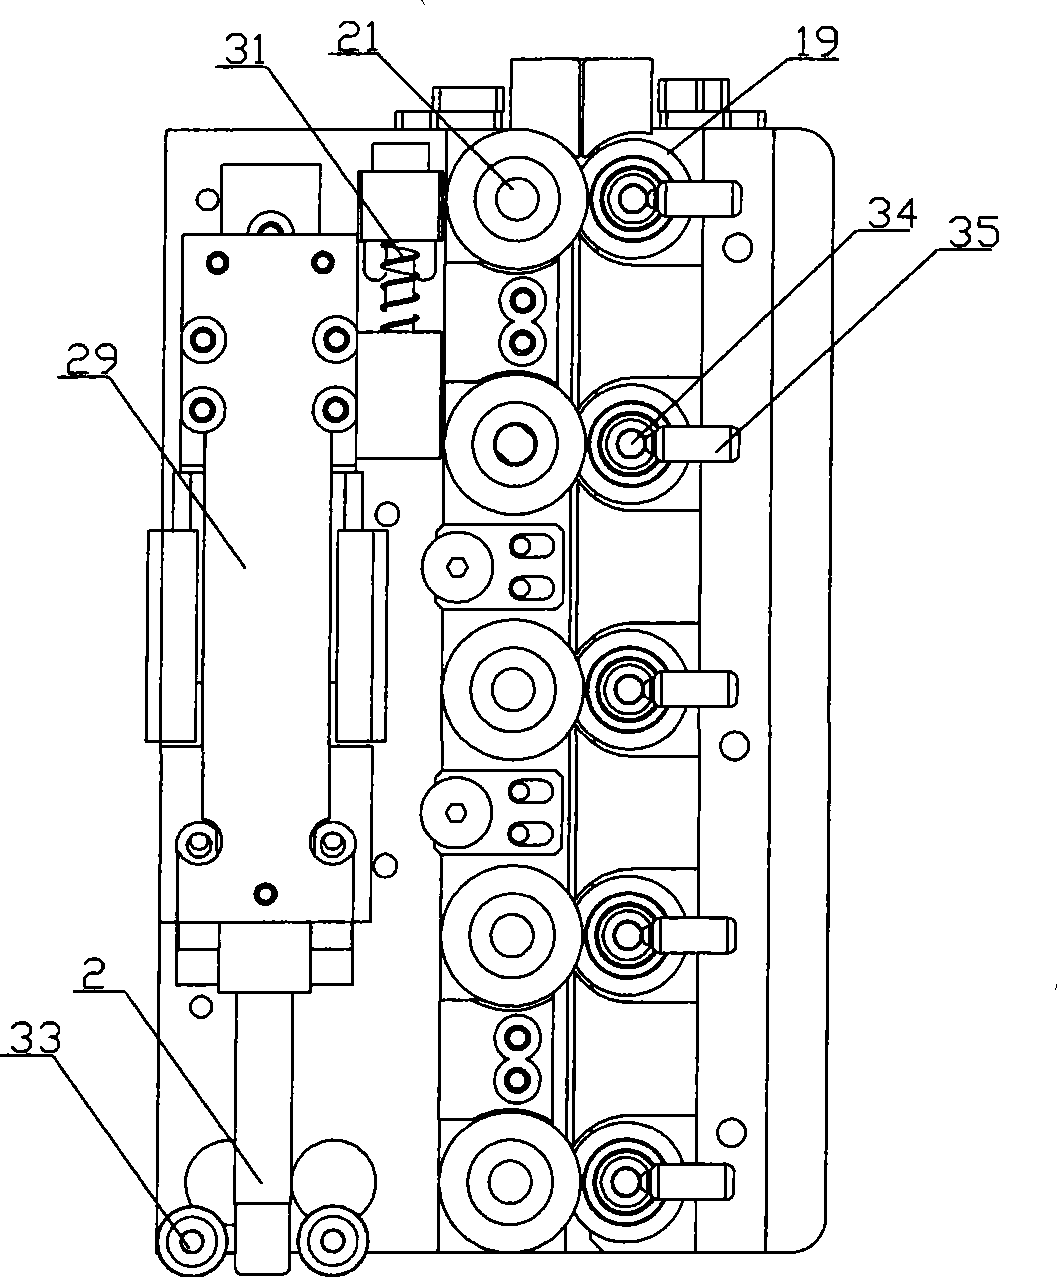 Double side continuous series welding system for fragment crystal silicon chip and welding method thereof